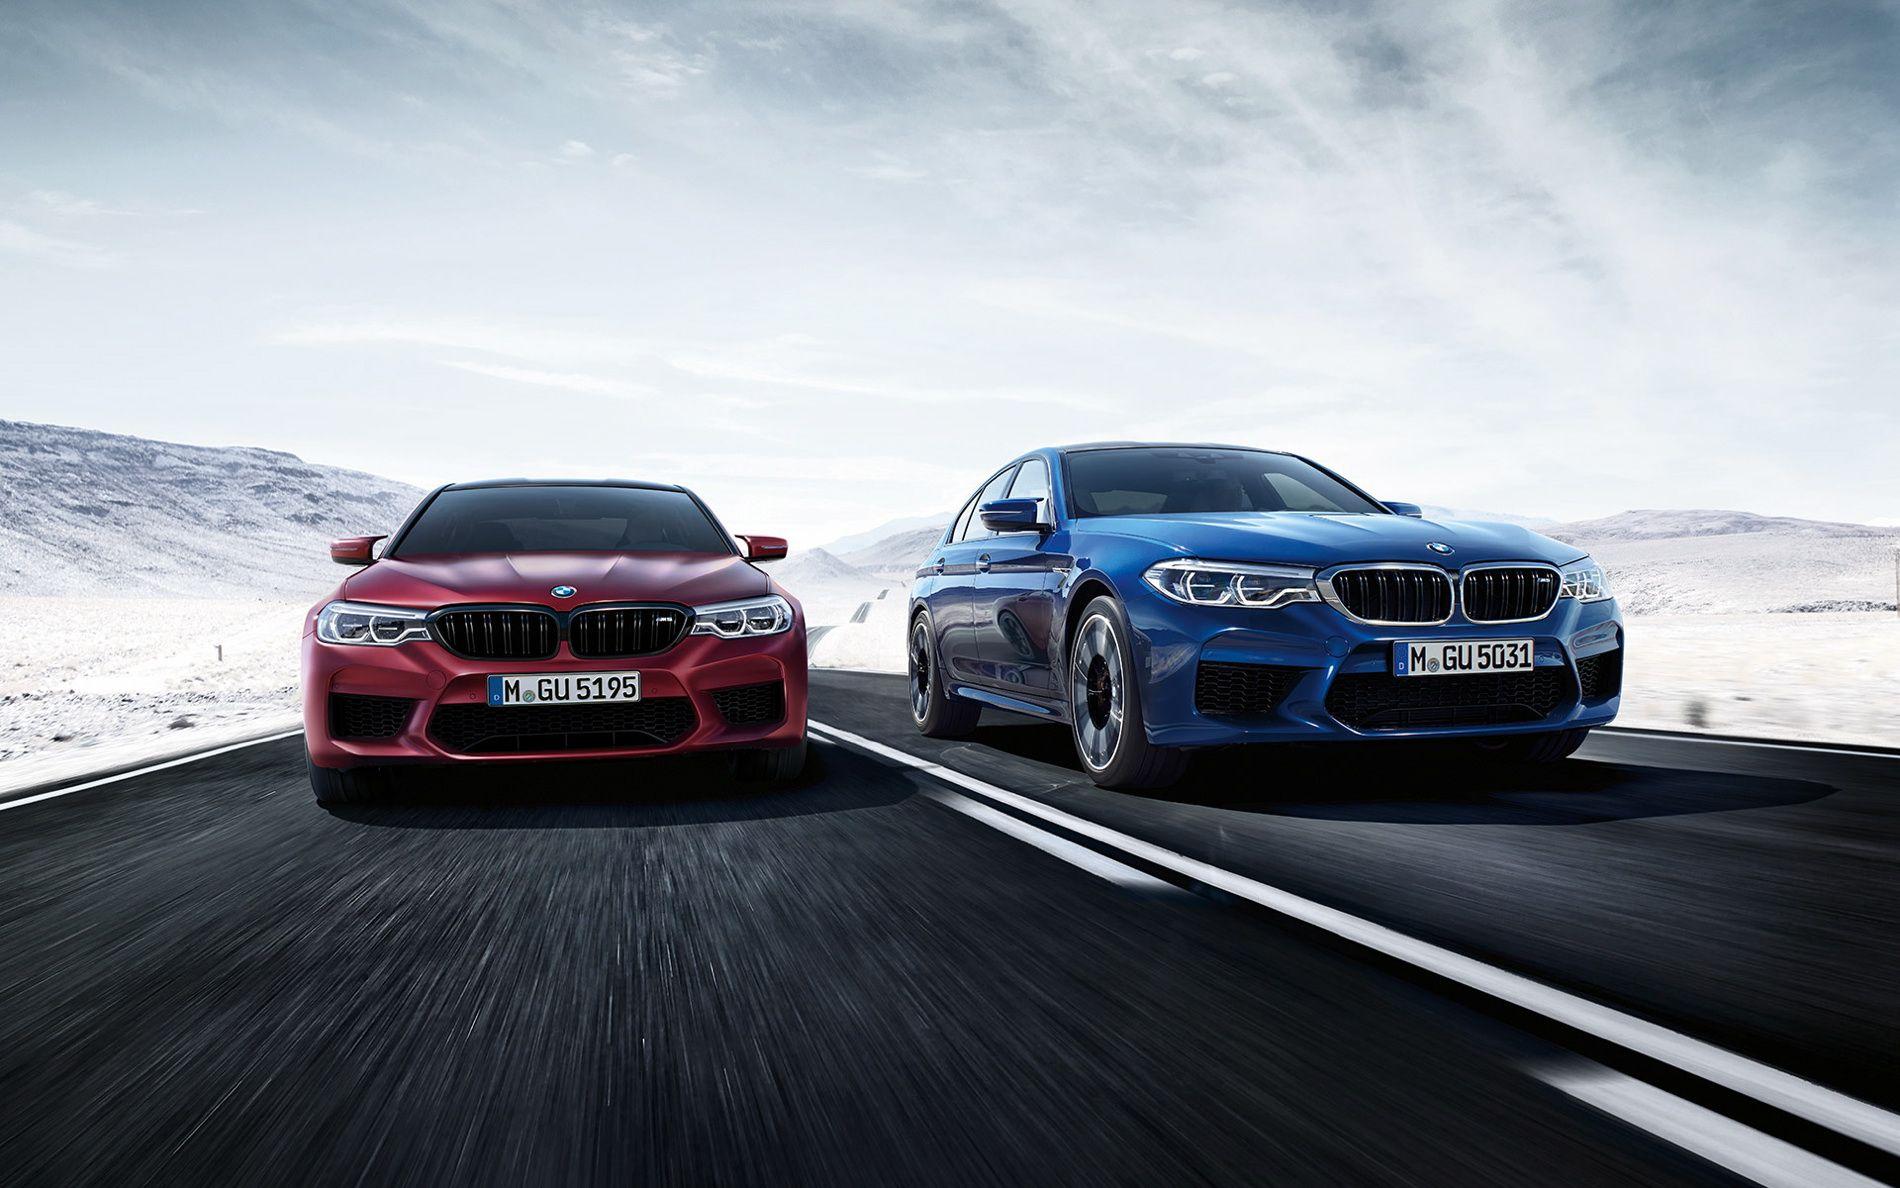 Download wallpaper of the new 2018 BMW F90 M5